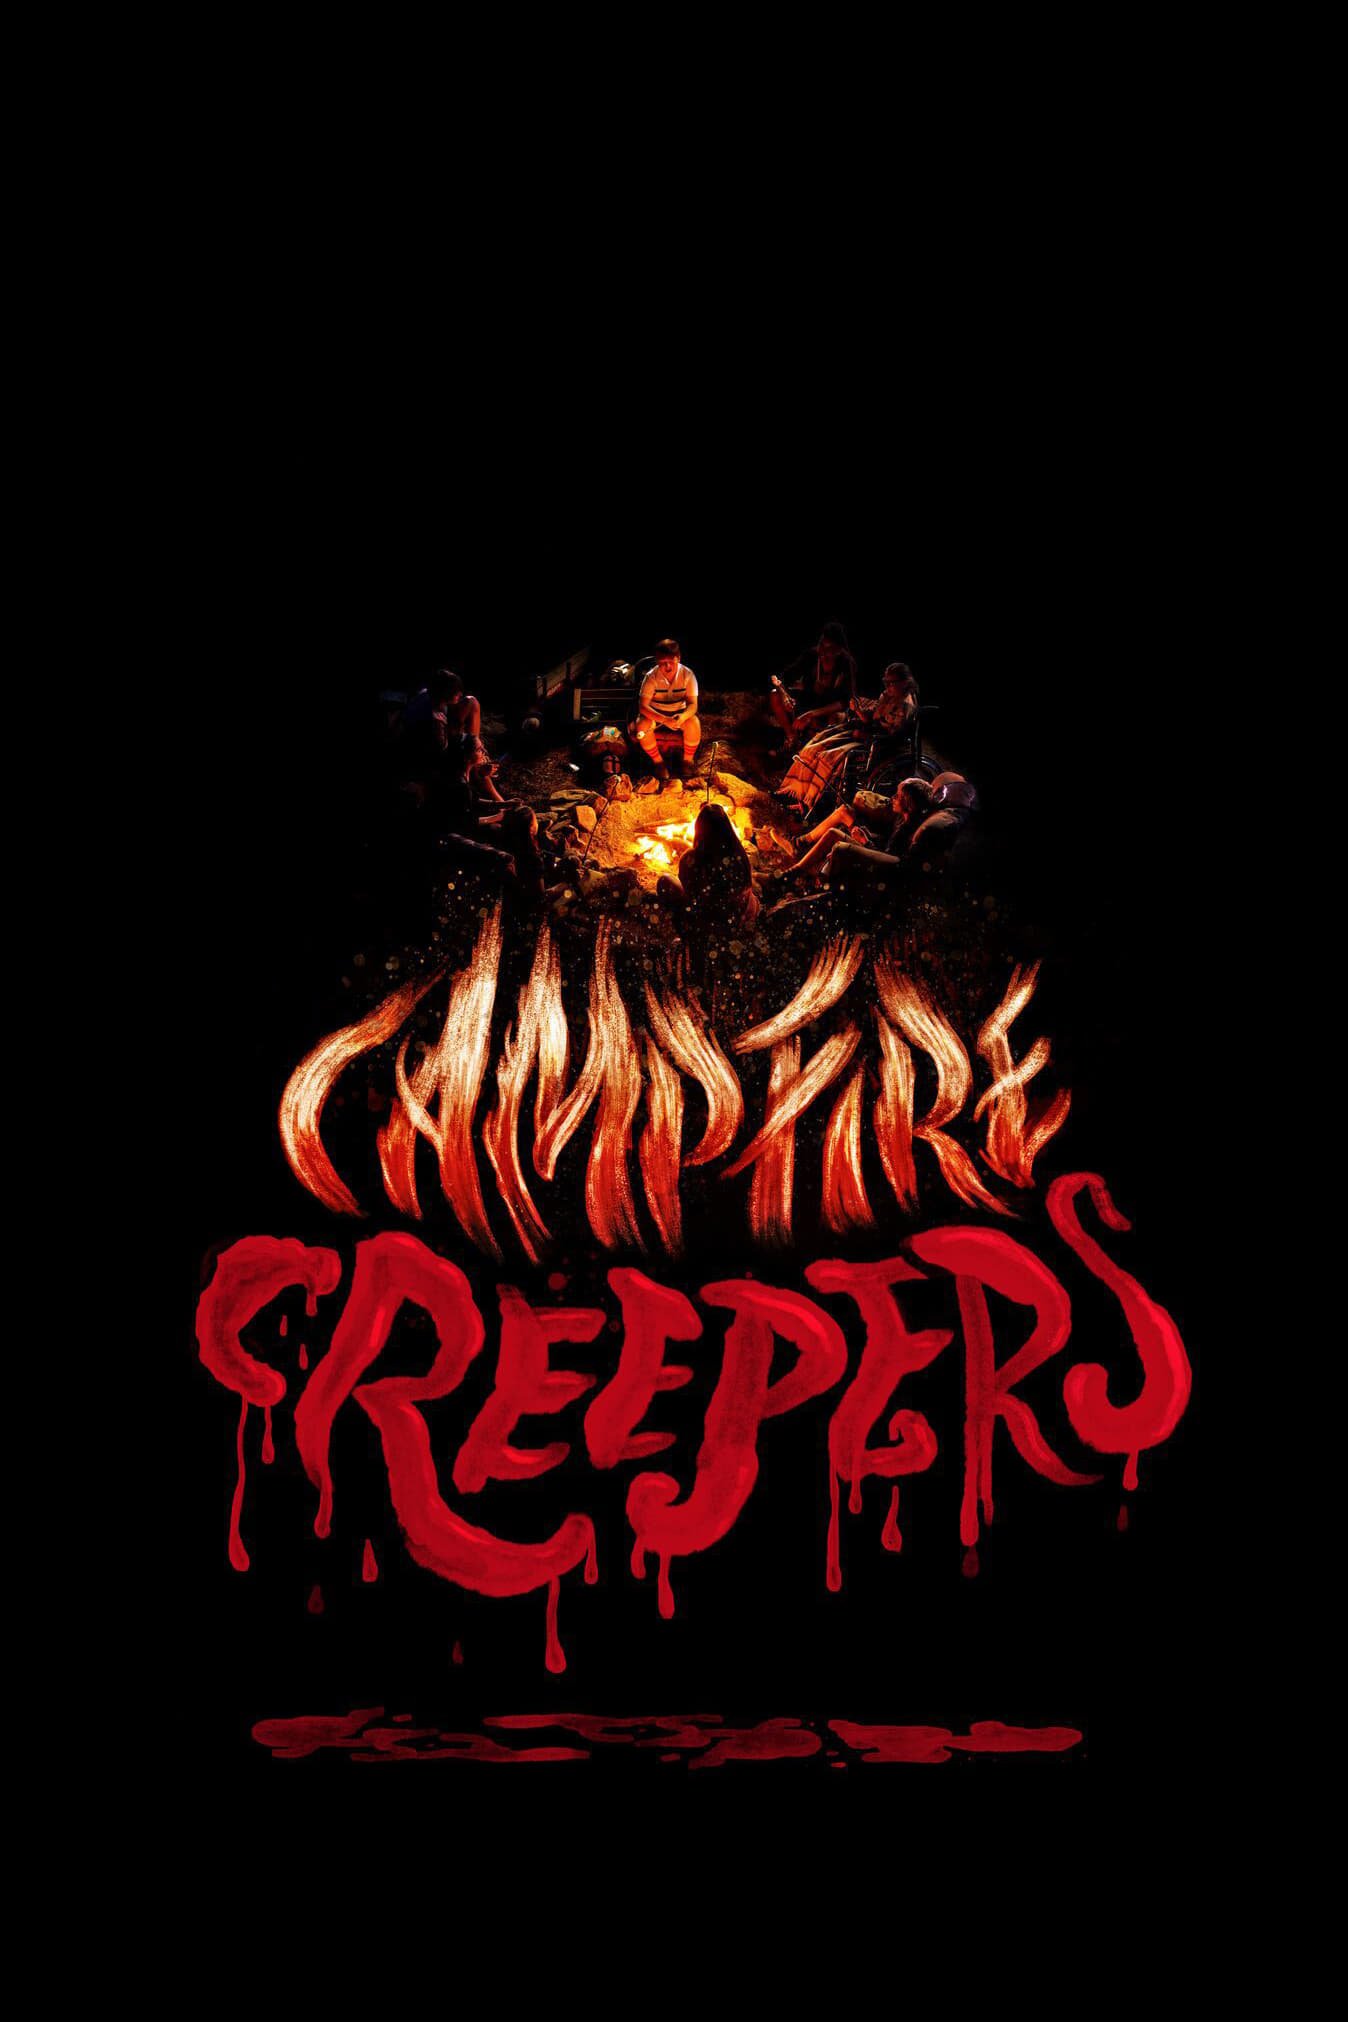 Campfire Creepers: The Skull of Sam